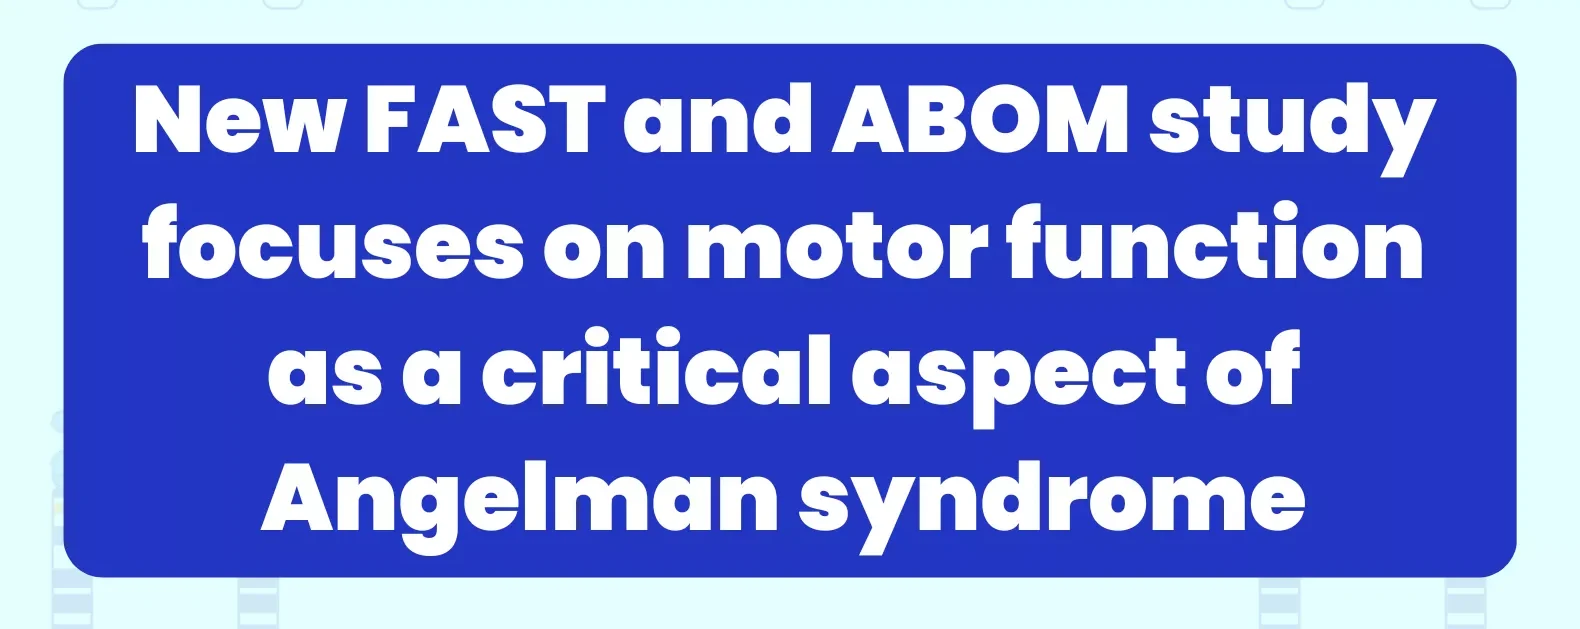 New FAST and ABOM study